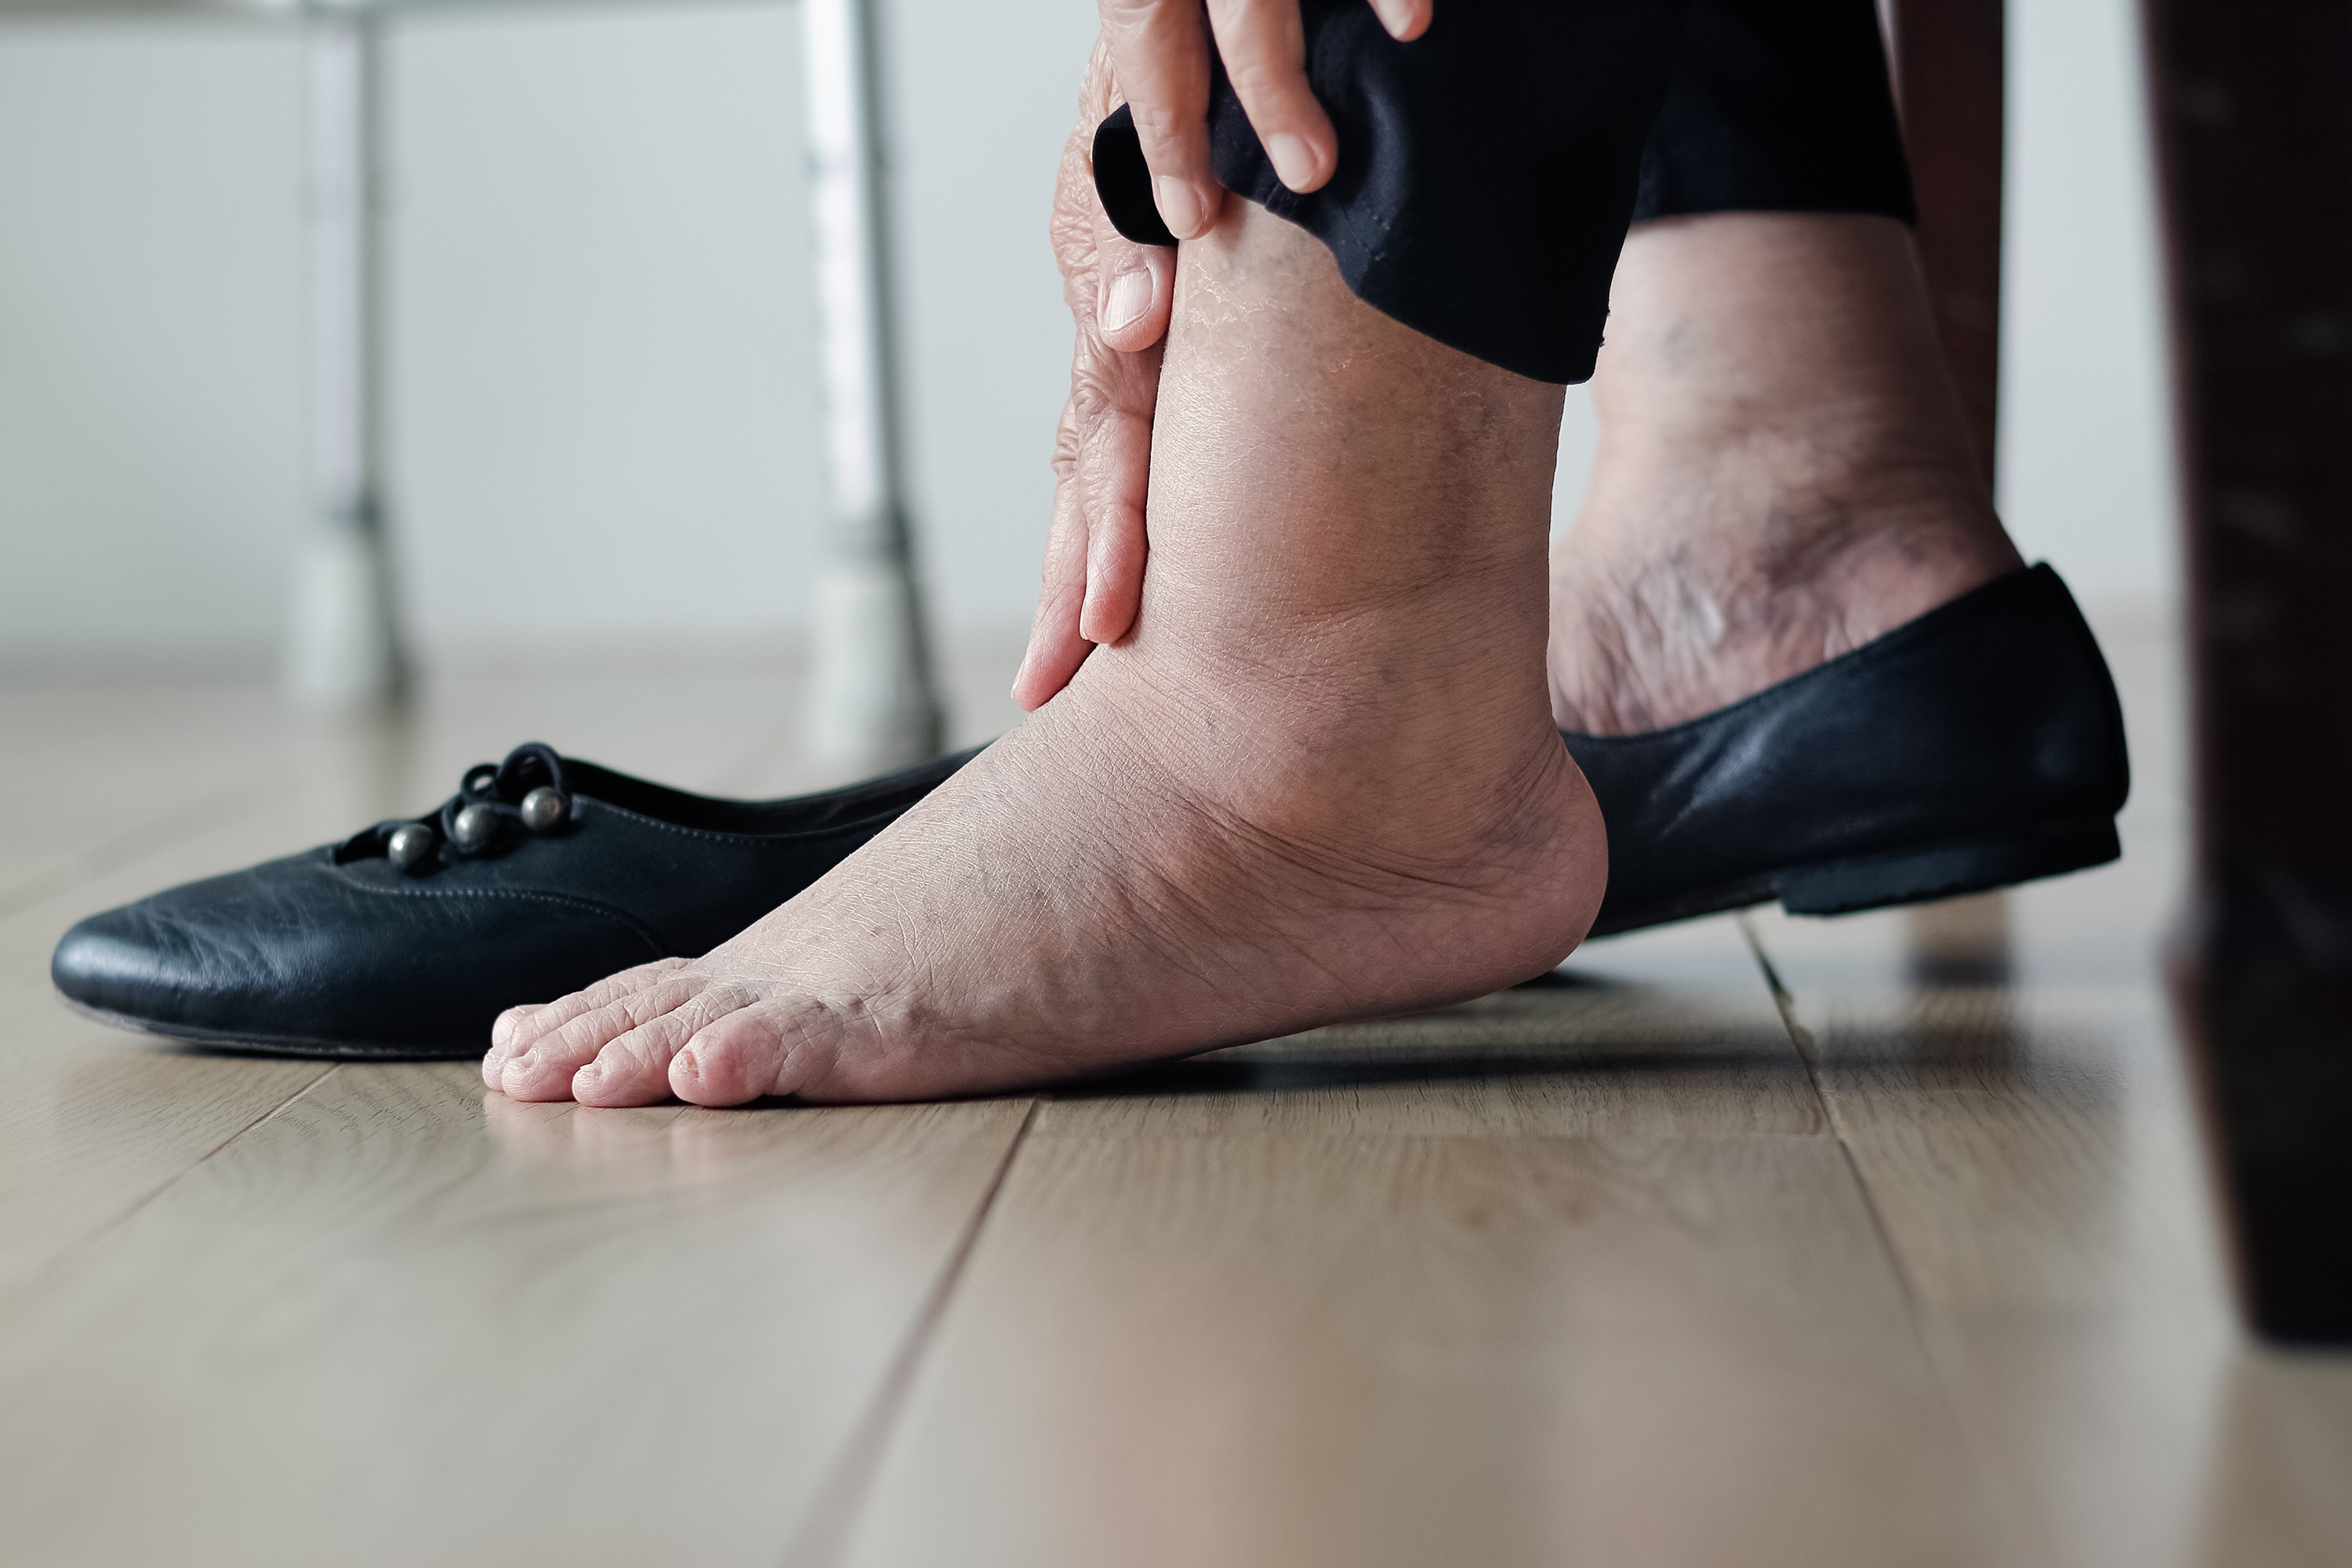 What Should I Do When My Foot or Ankle Pain Won't Go Away? - Penn Medicine